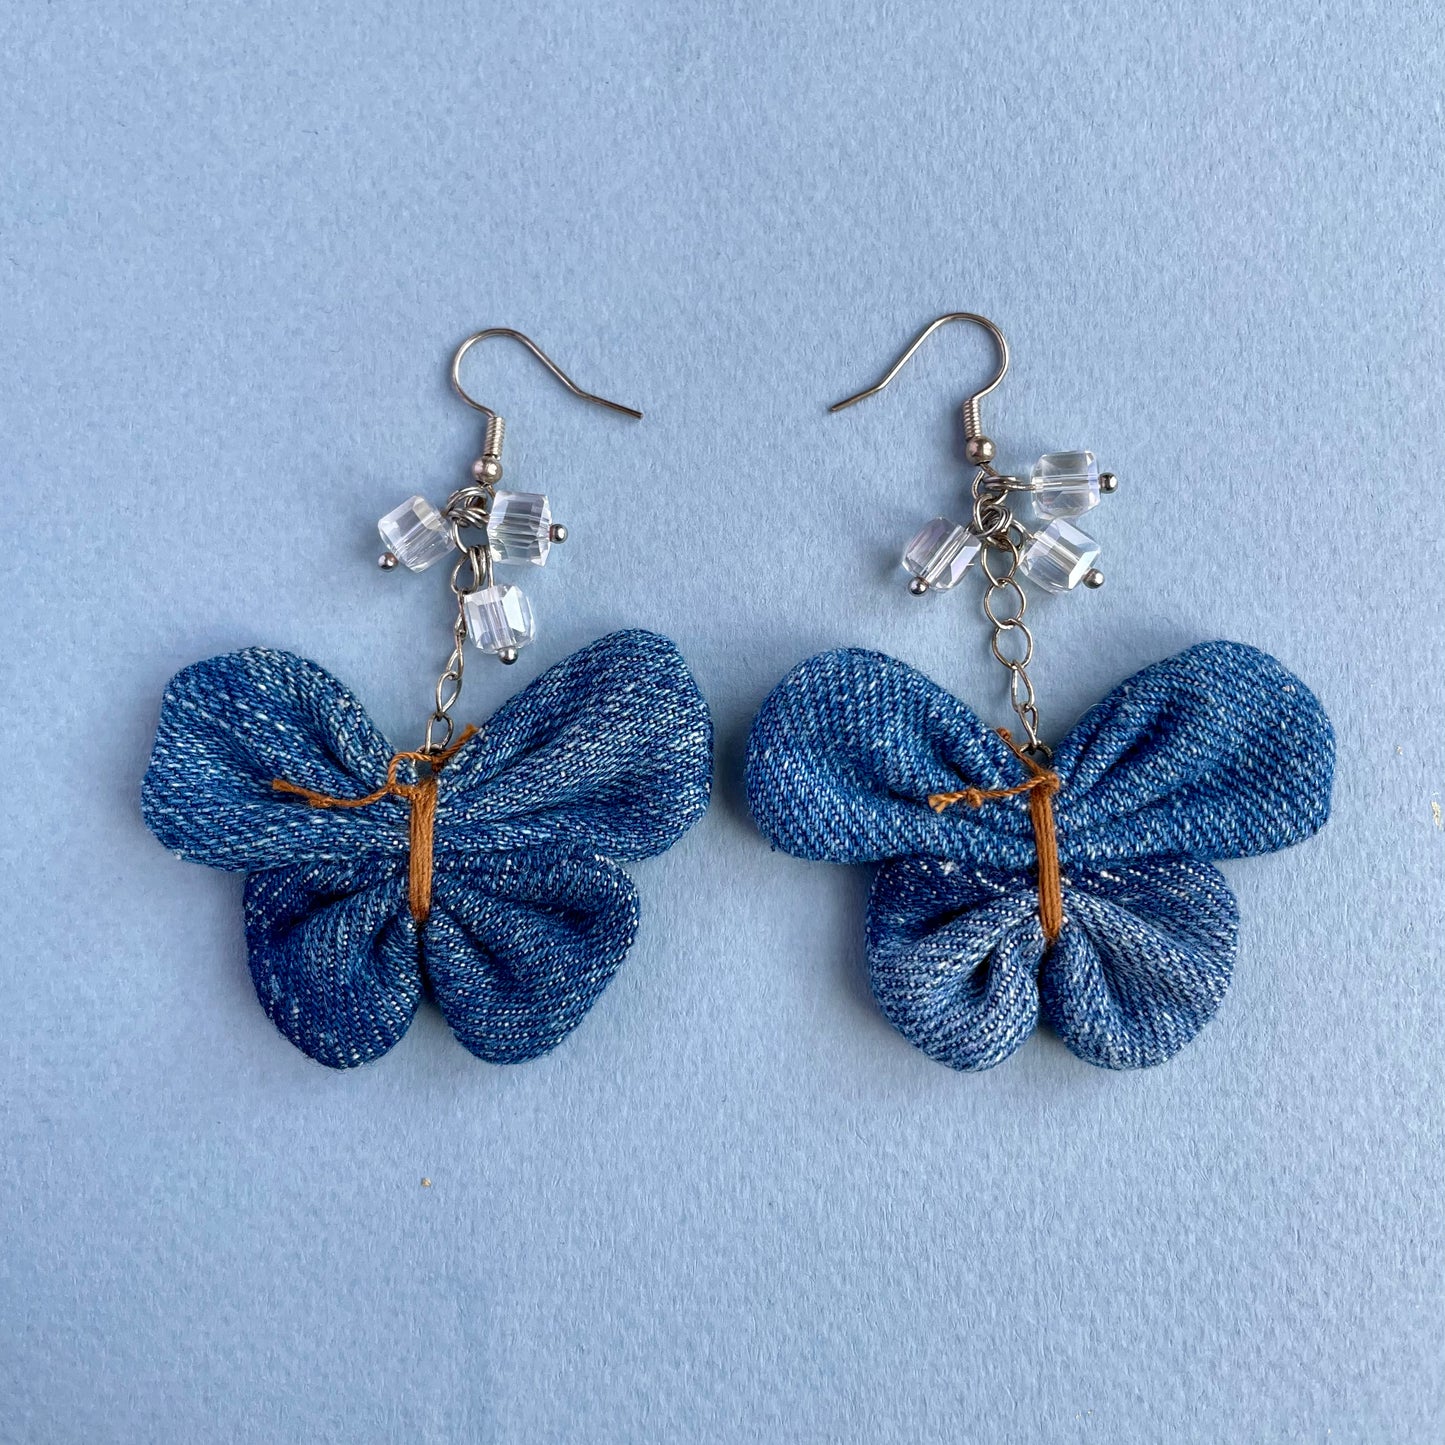 Earring Denim Butterfly with pearls